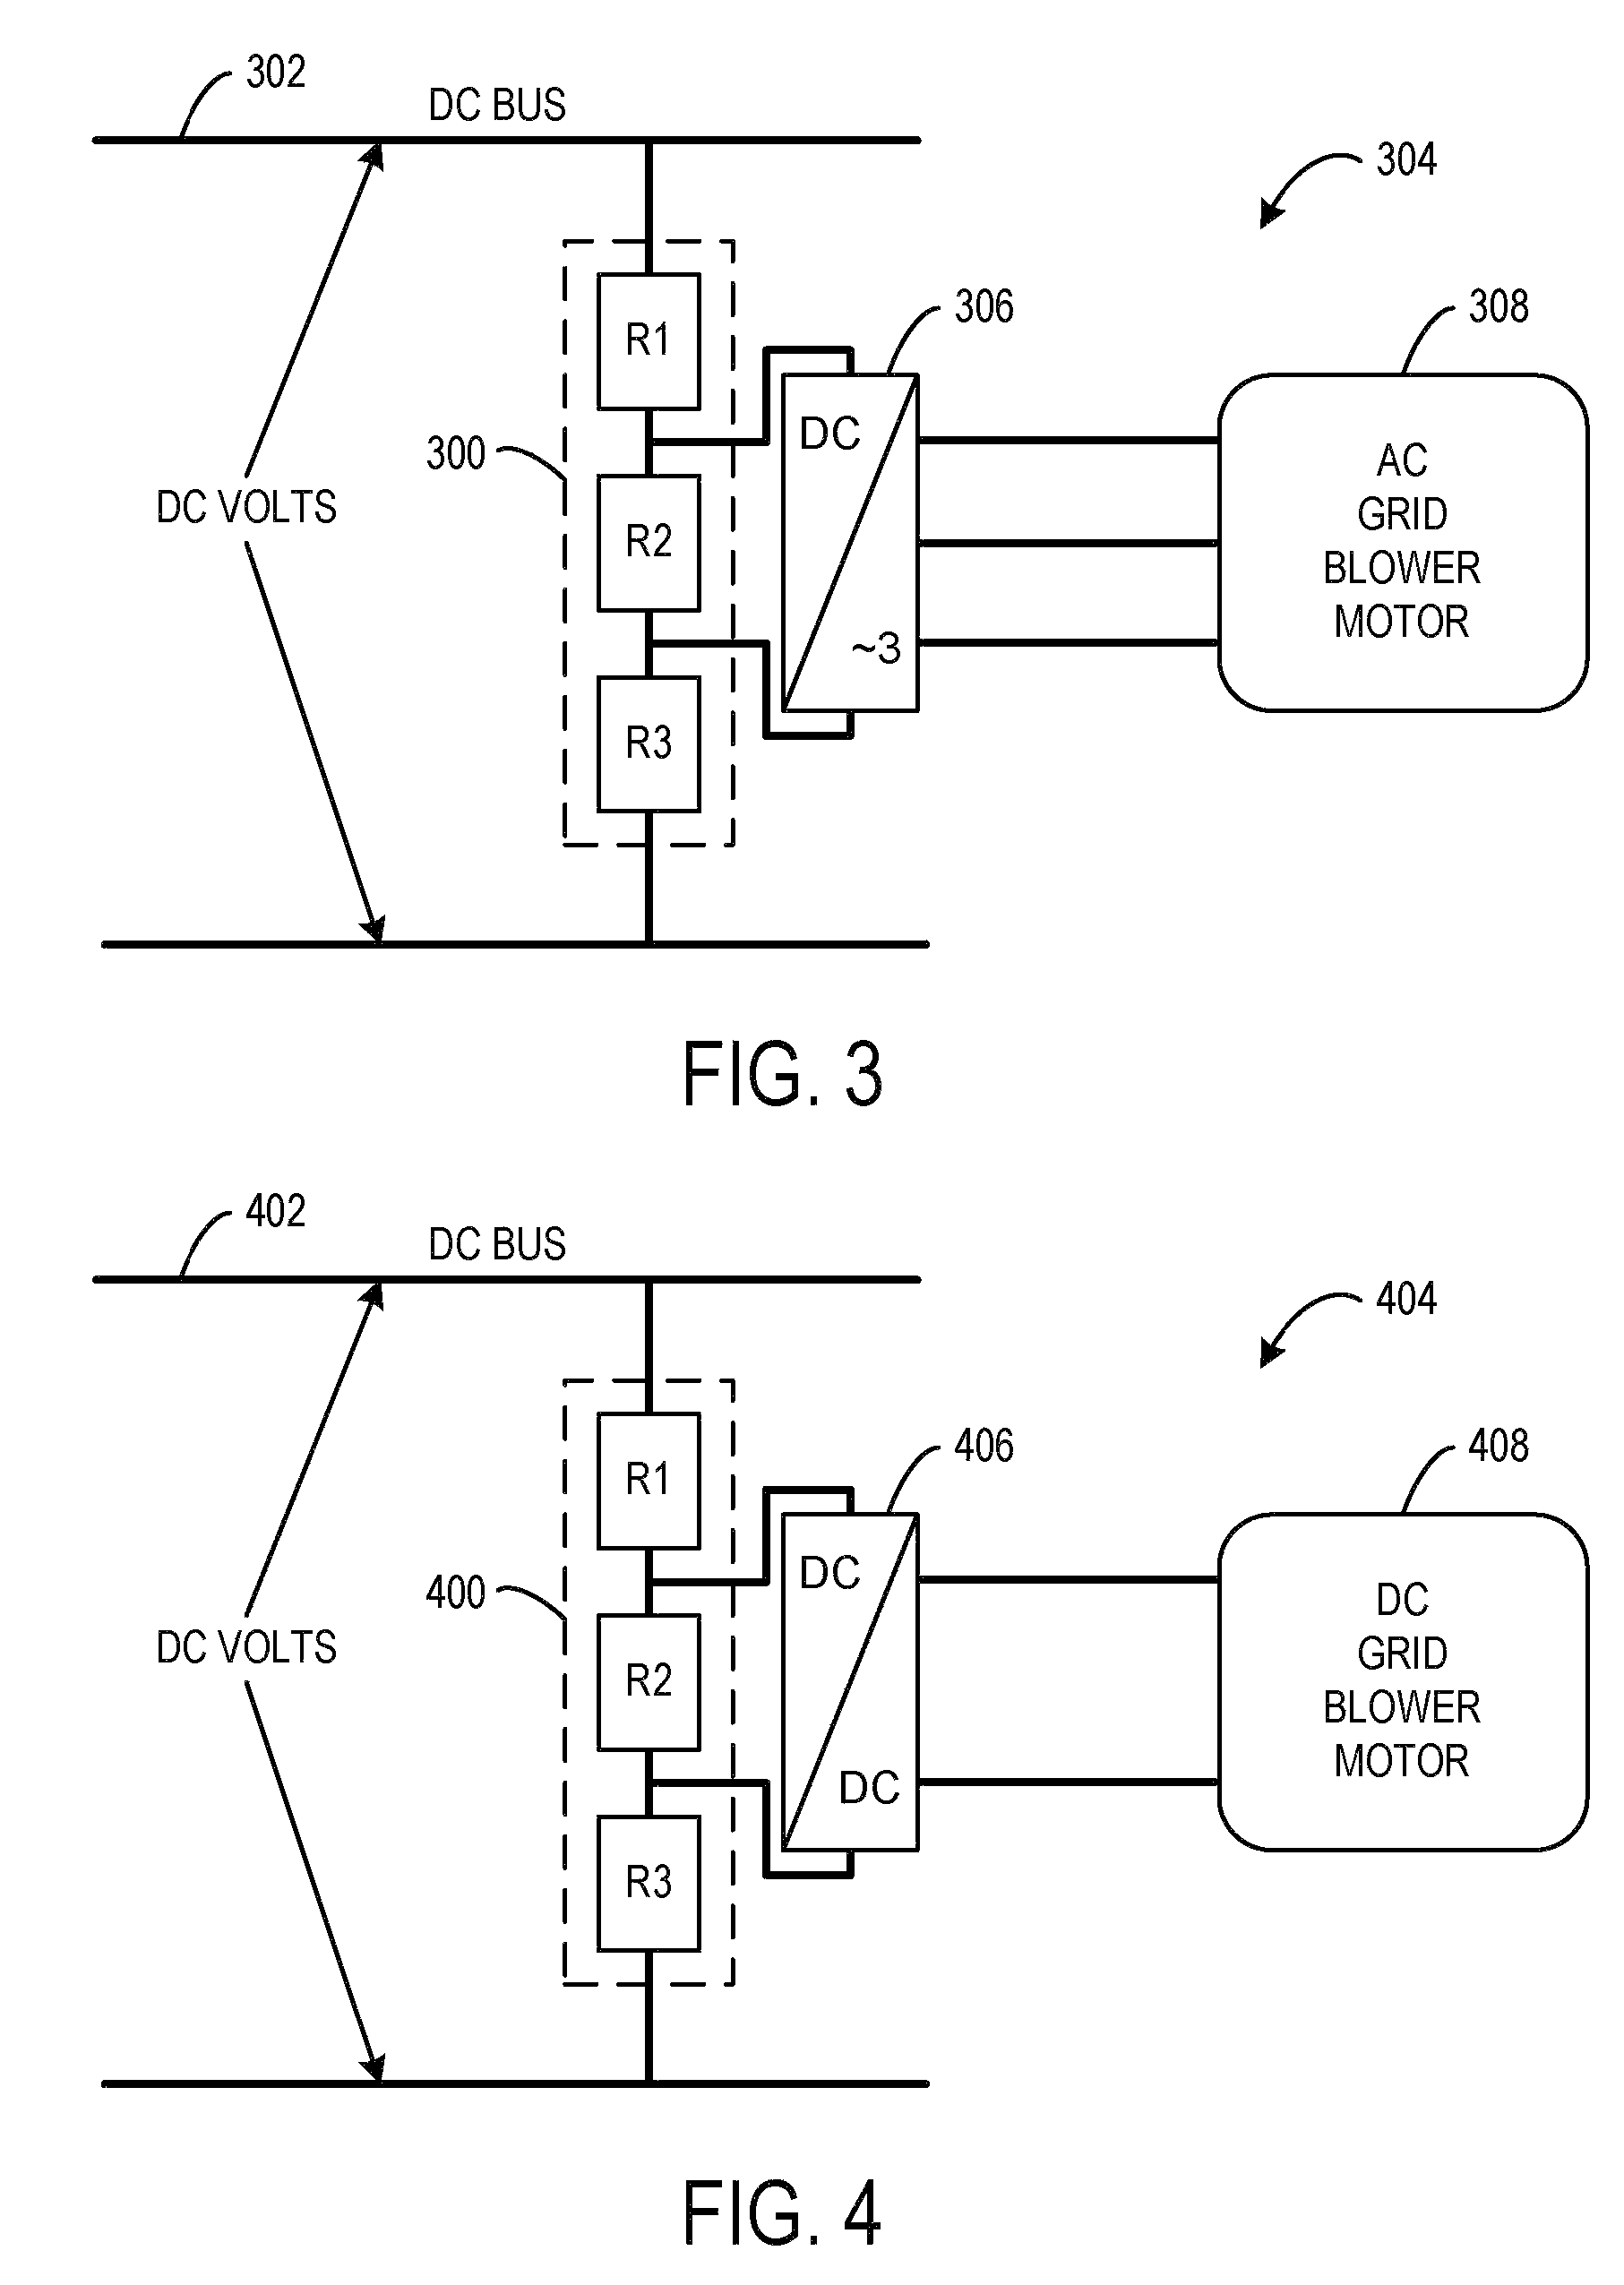 Variable-speed-drive system for a grid blower